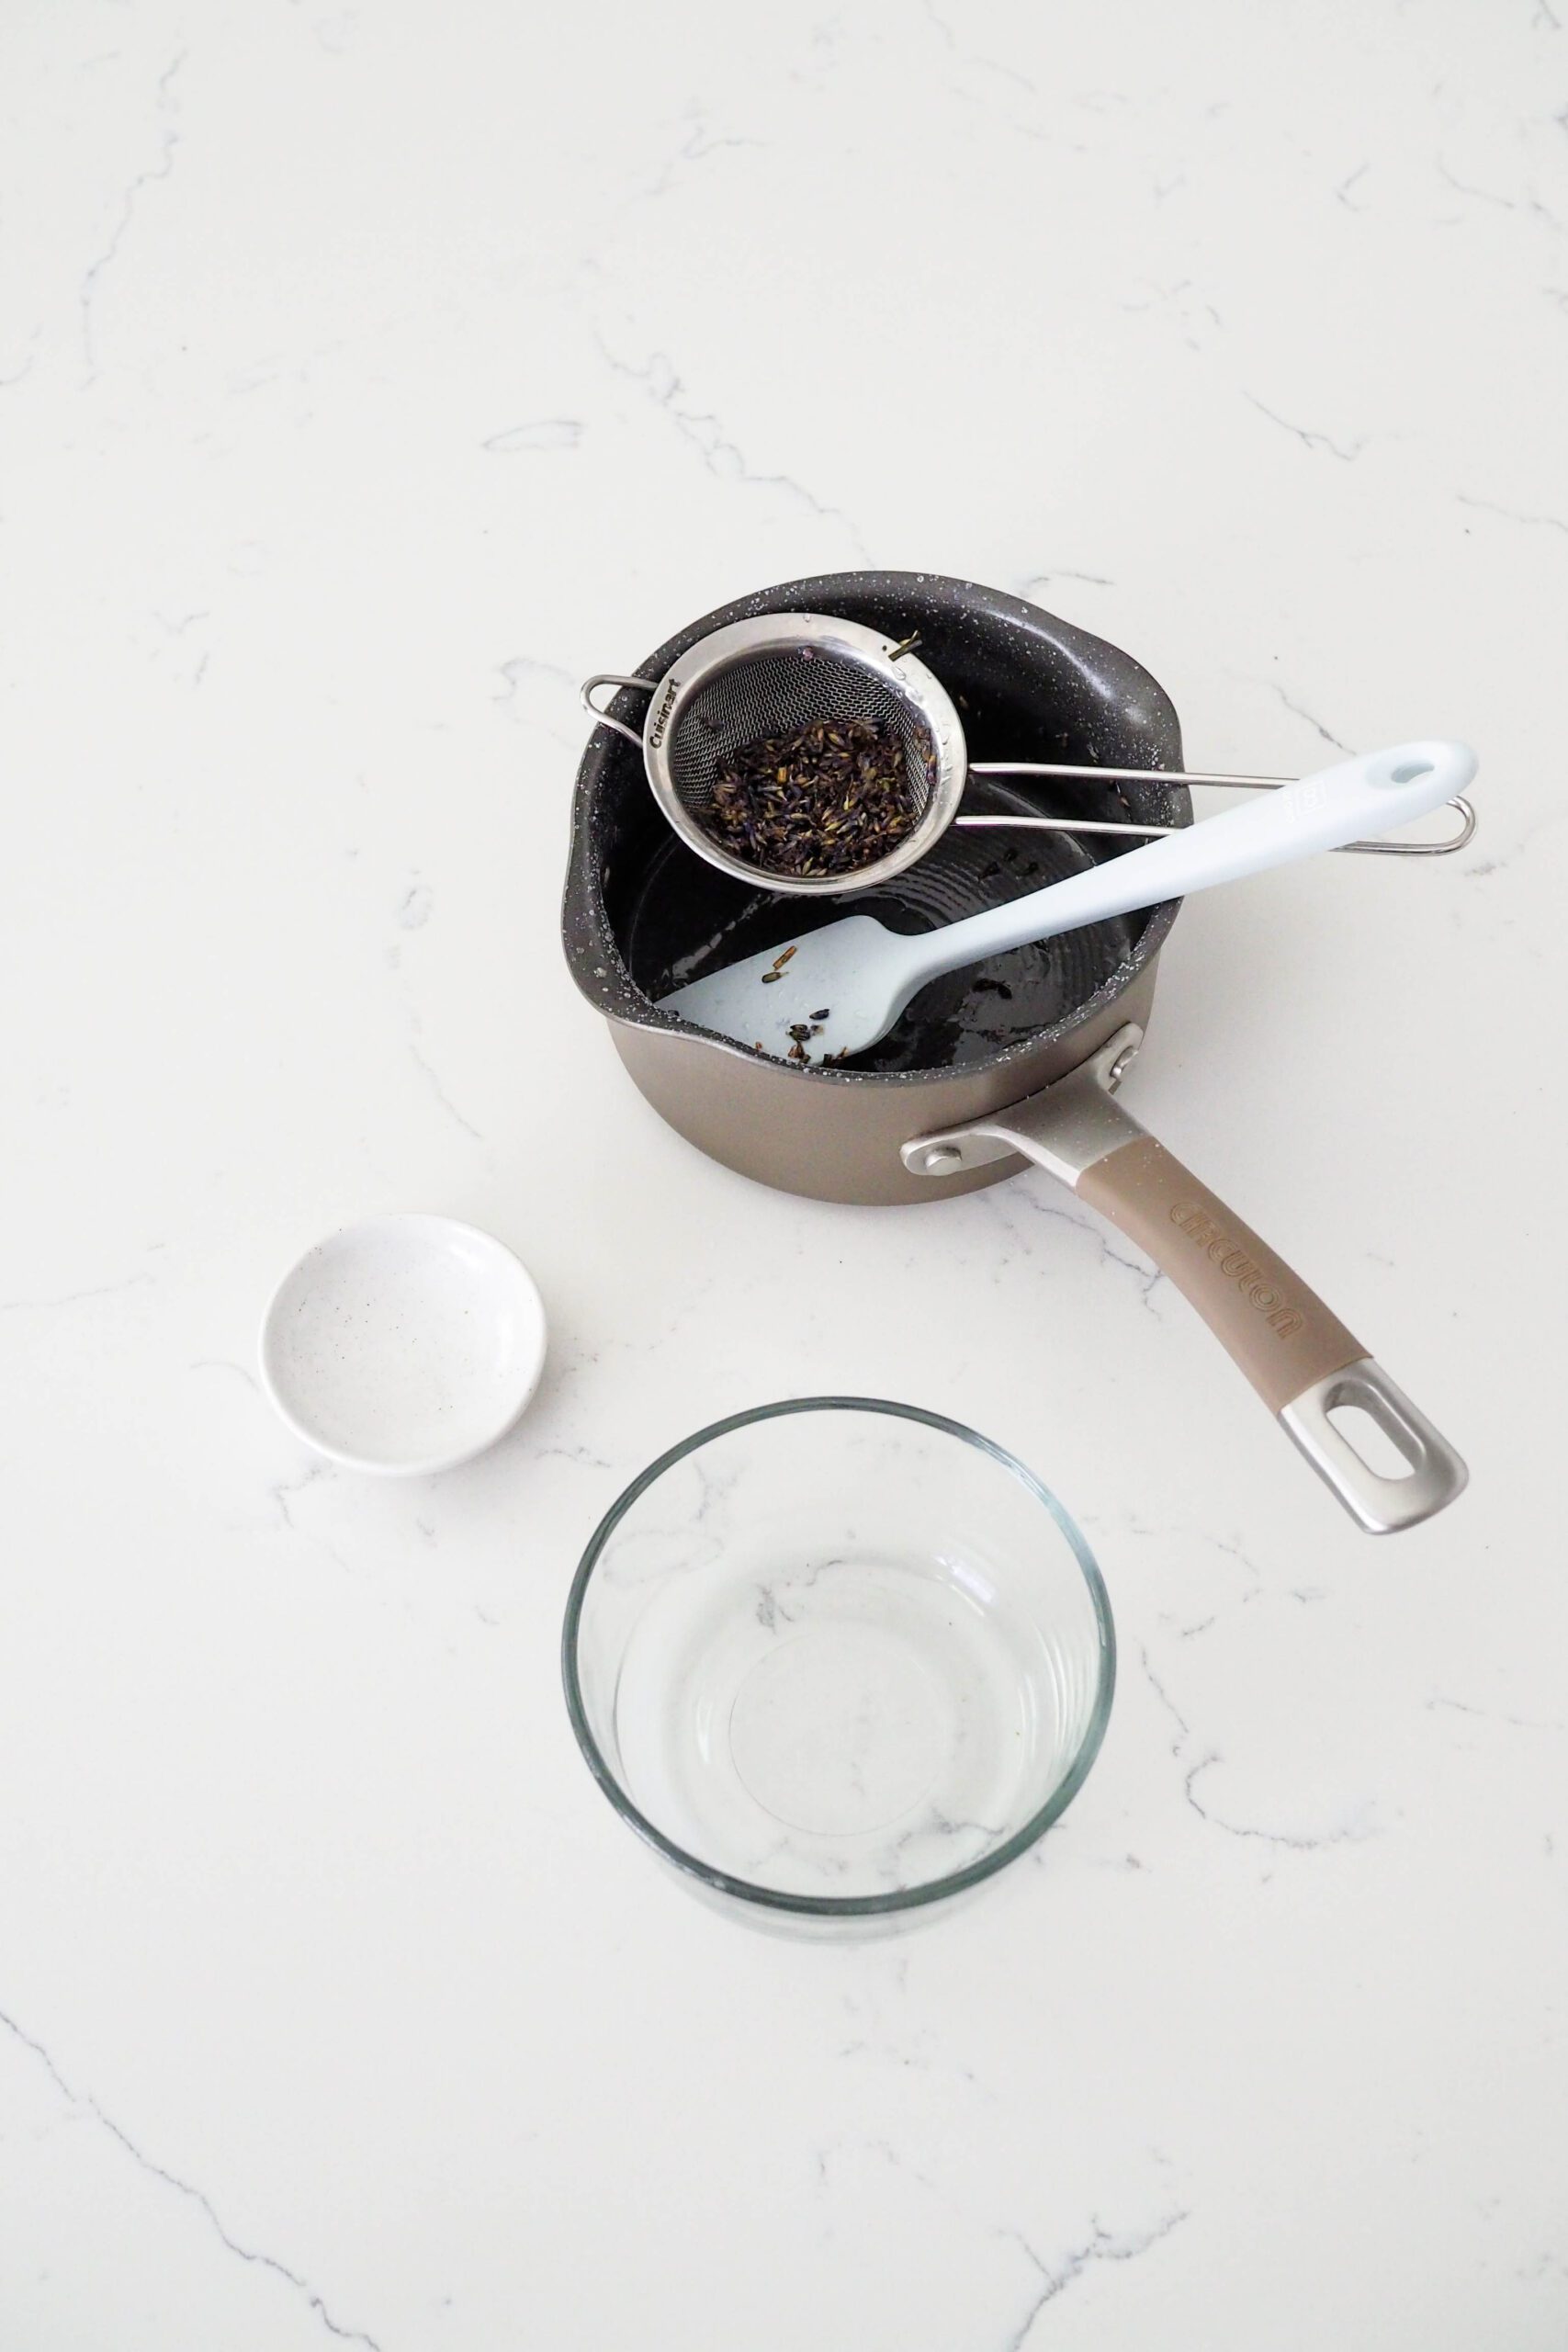 A saucepan, spatula, strainer, and two bowls on a white counter.